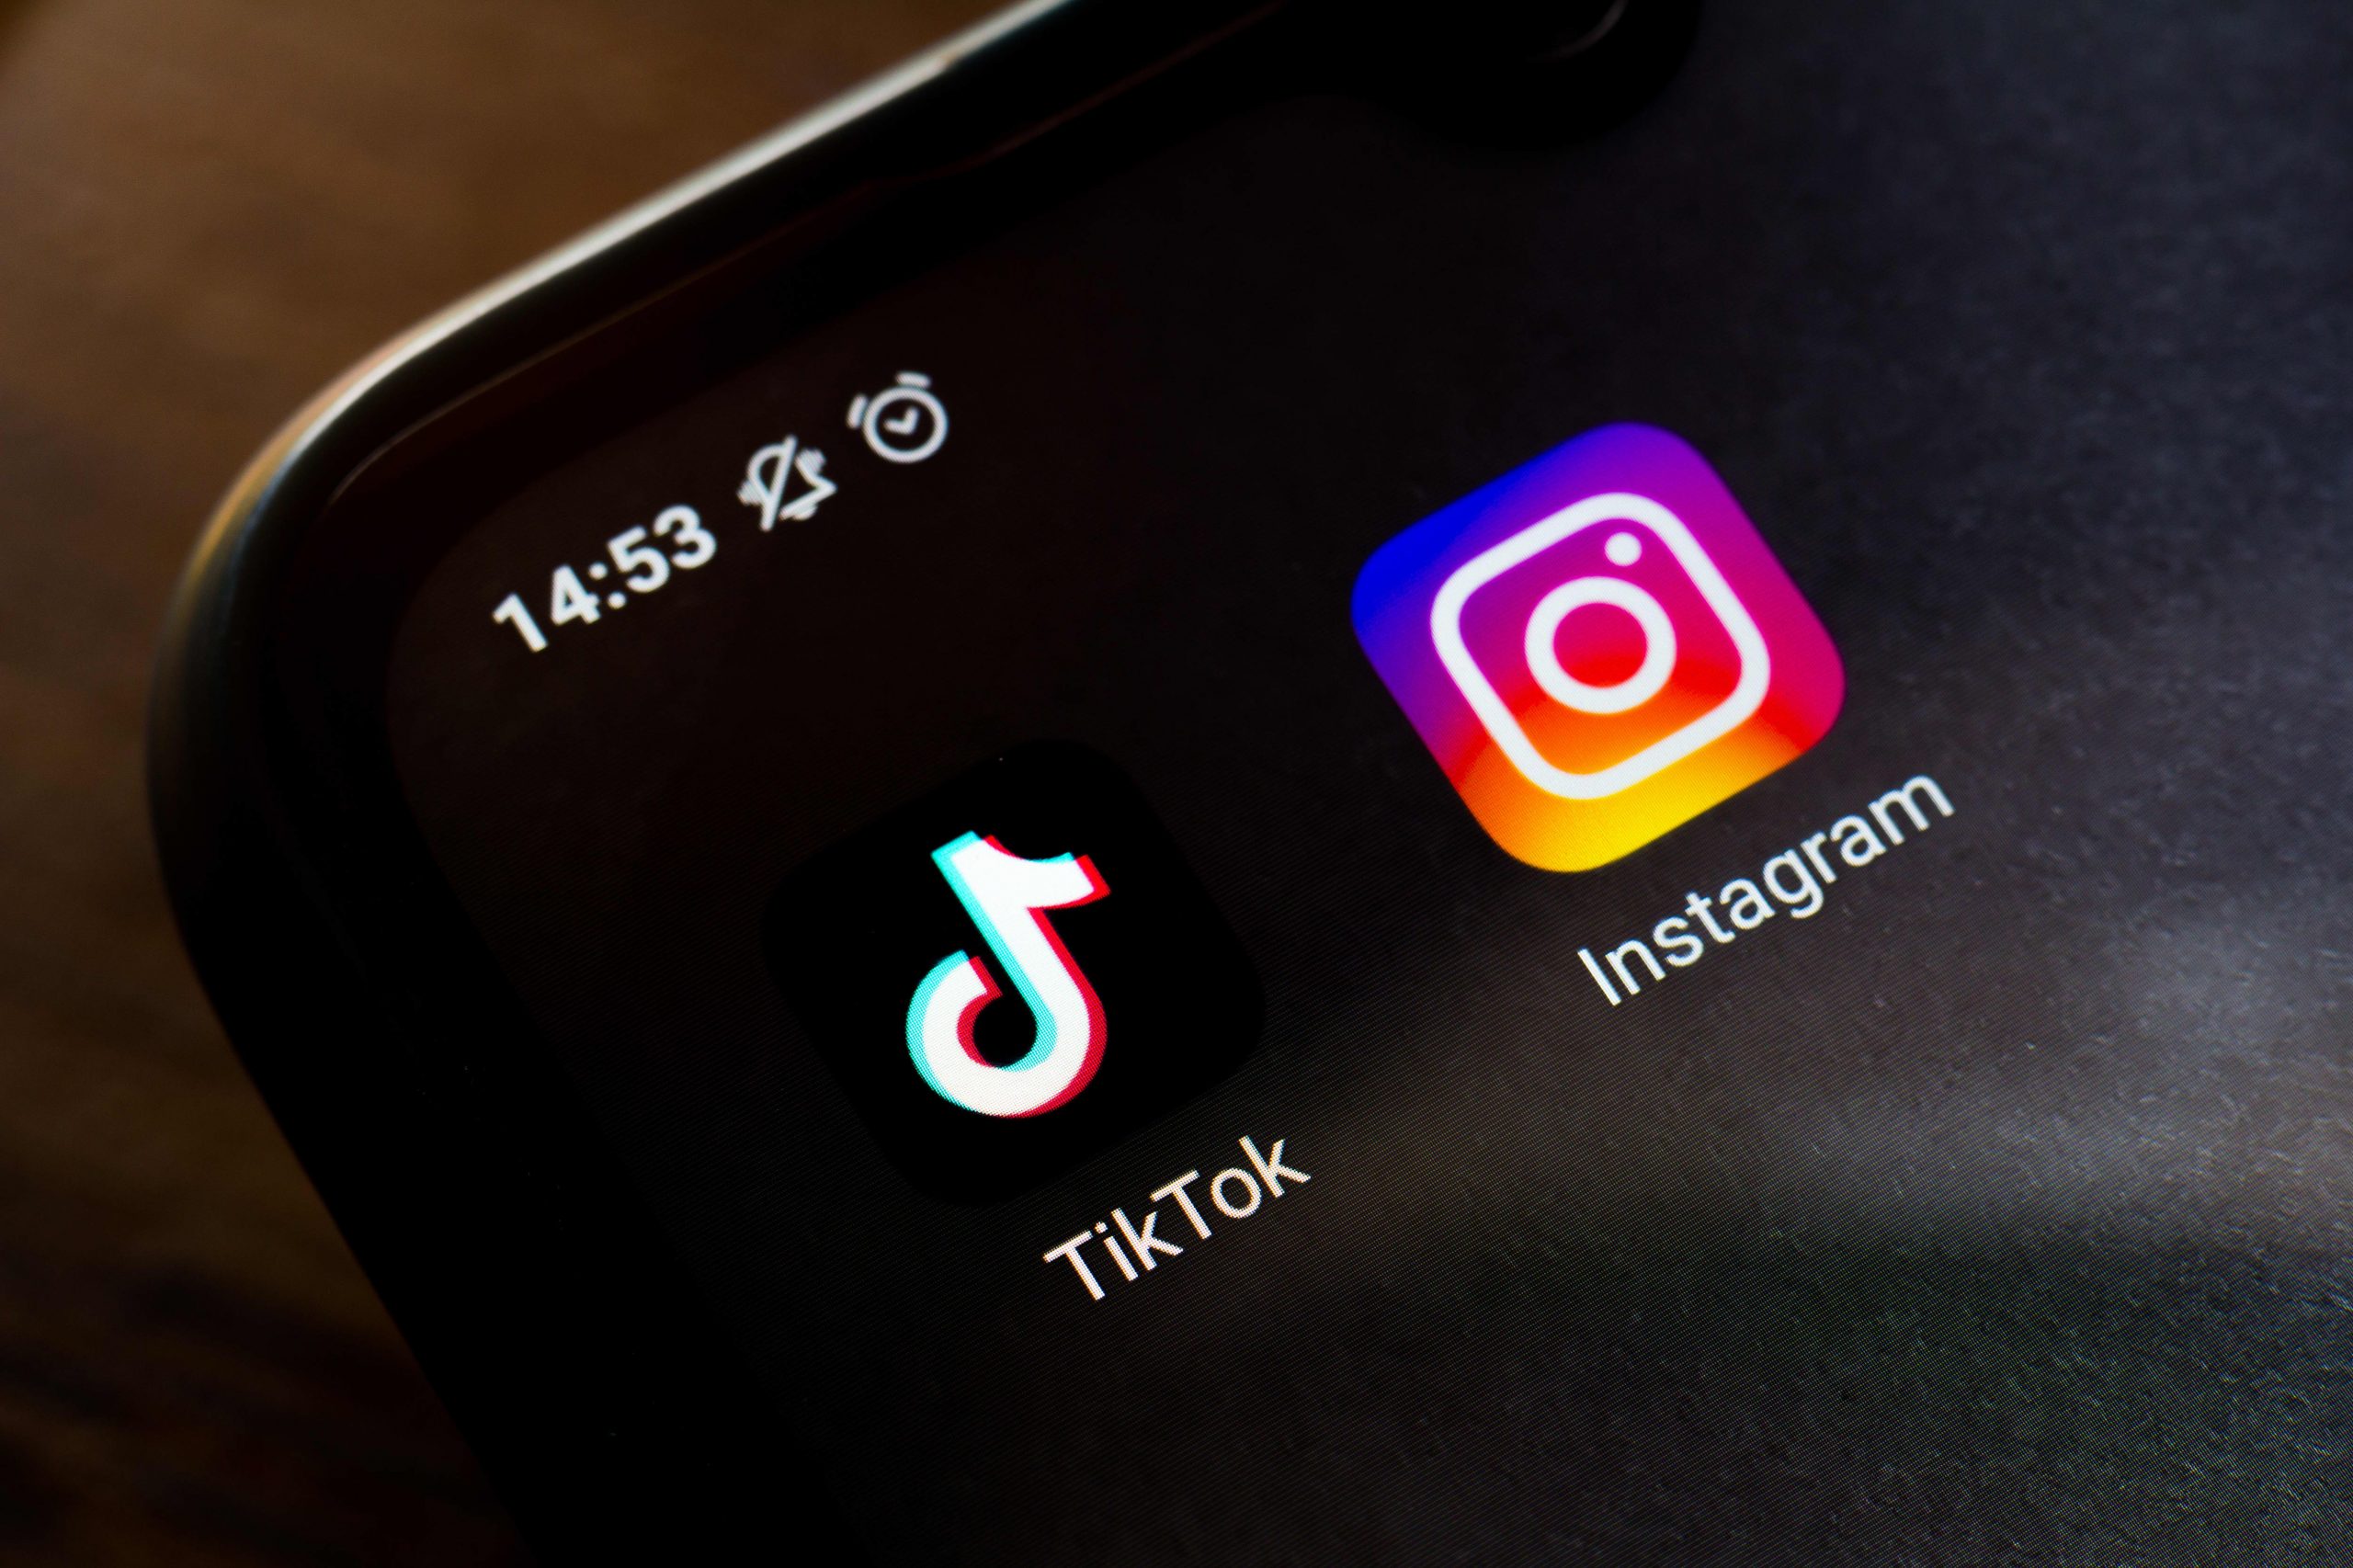 Facebook is testing drastic changes to Instagram to make it more like TikTok